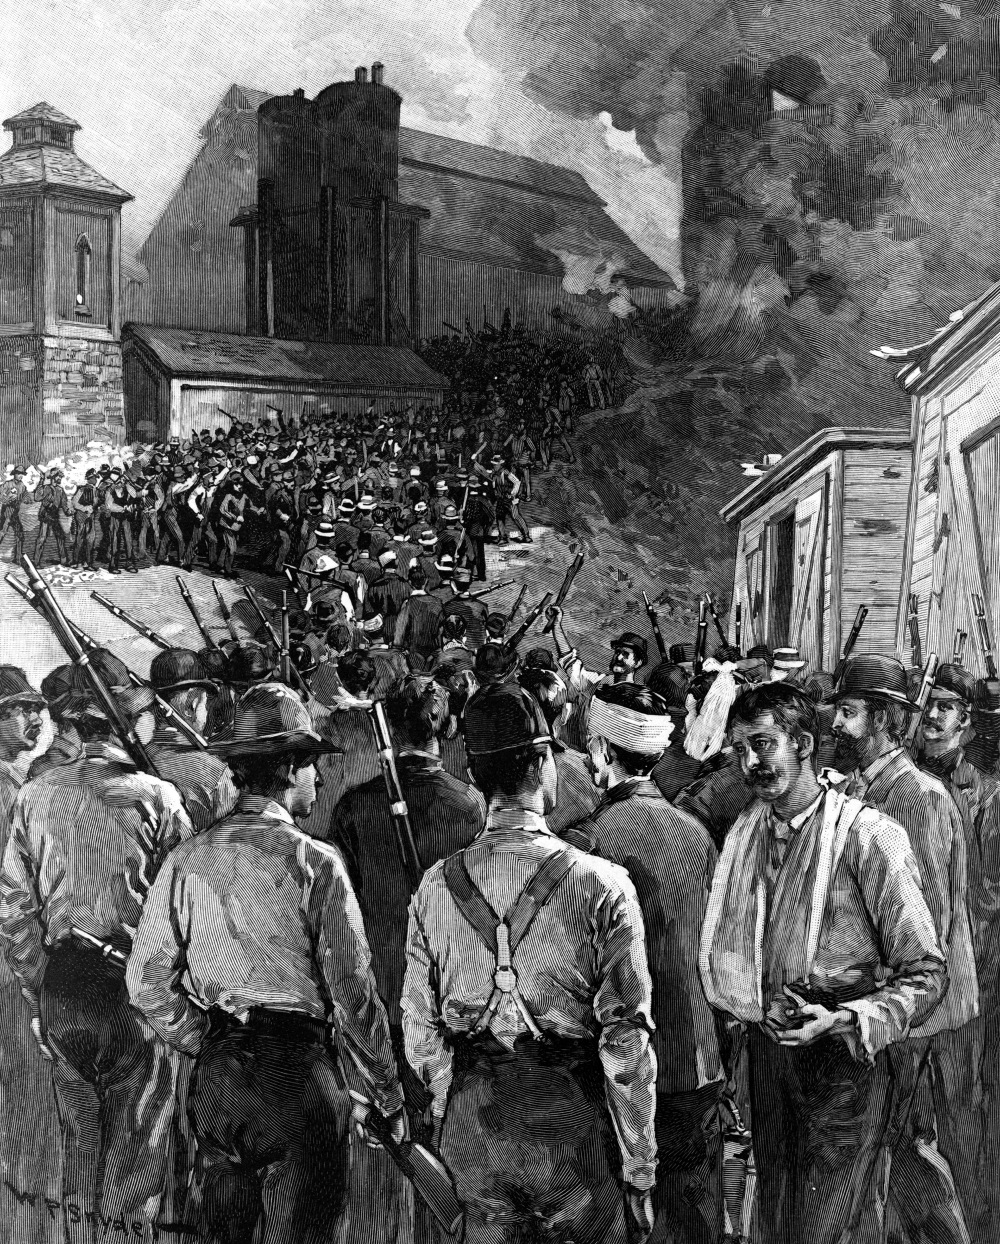 An 1892 cover of Harper’s Weekly depicting the Homestead Riot, showed Pinkerton men who had surrendered to the steel mill workers navigating a gauntlet of violent strikers. W.P. Snyder (artist) after a photograph by Dabbs, “The Homestead Riot,” 1892. Library of Congress, LC-USZ62-126046.